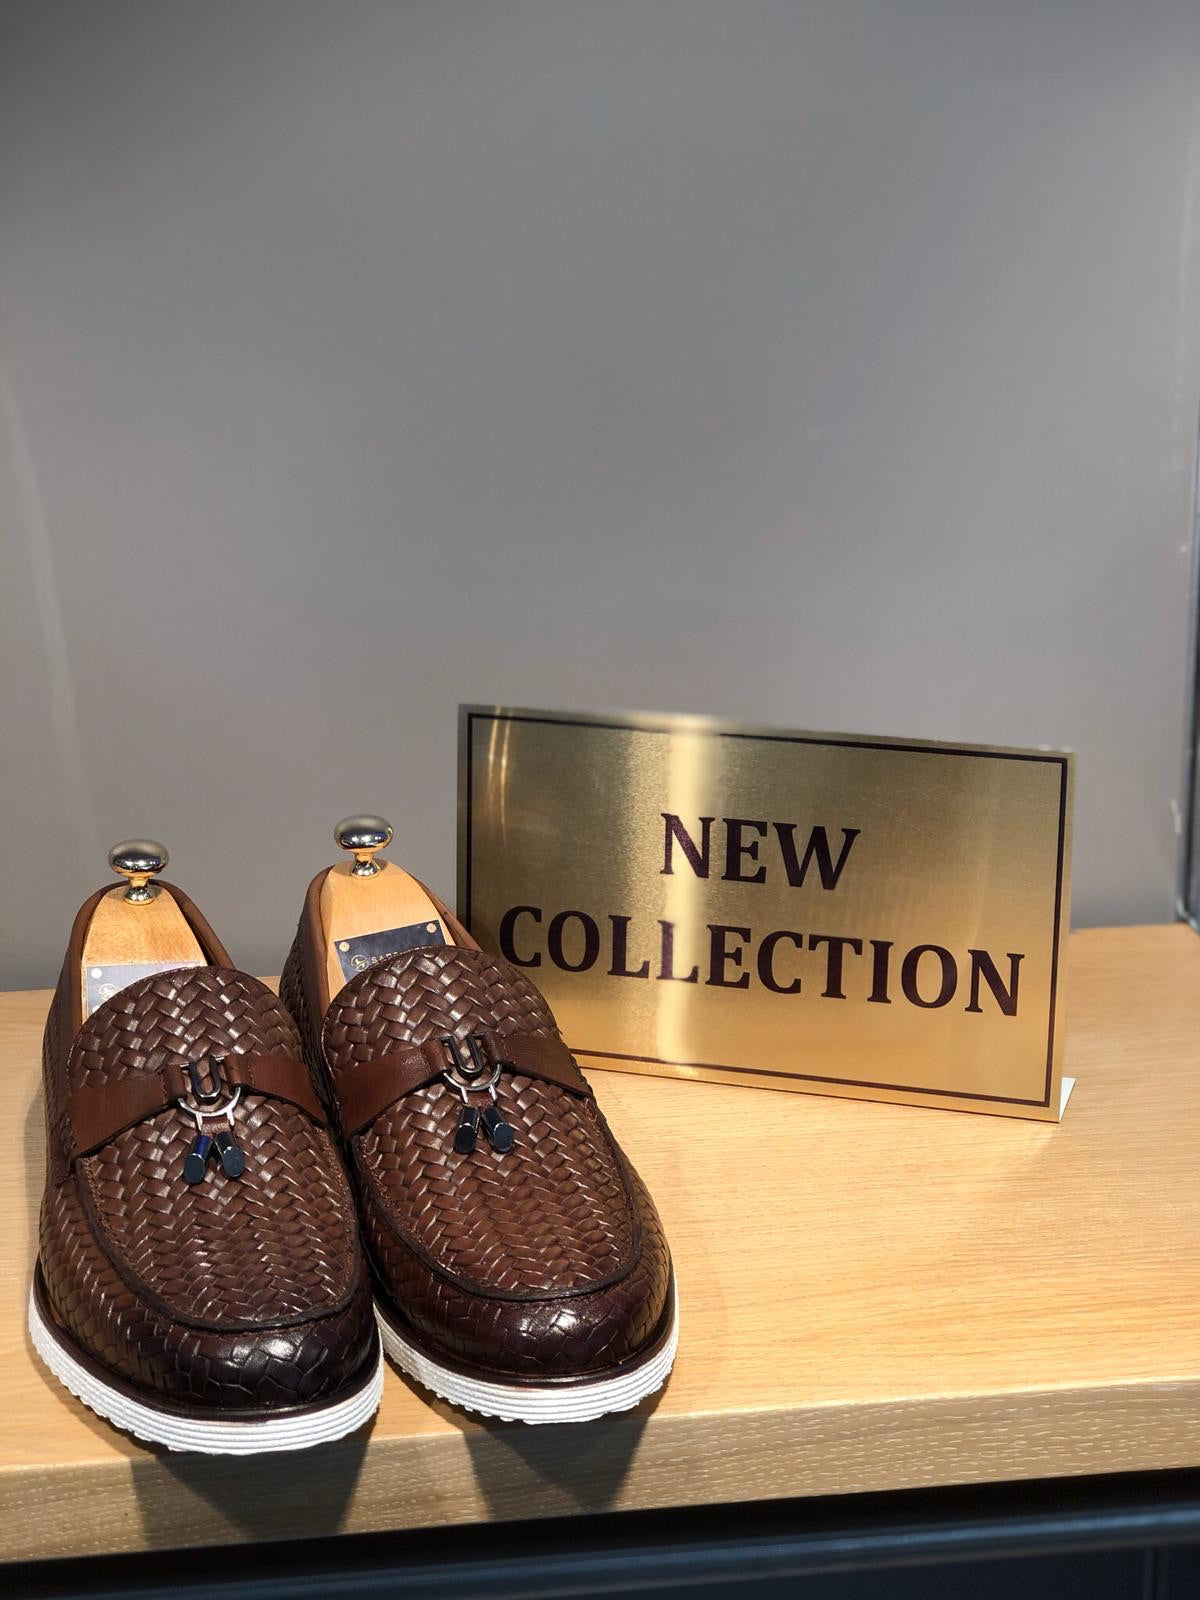 Odessa Brown Woven Leather Tassel Loafer